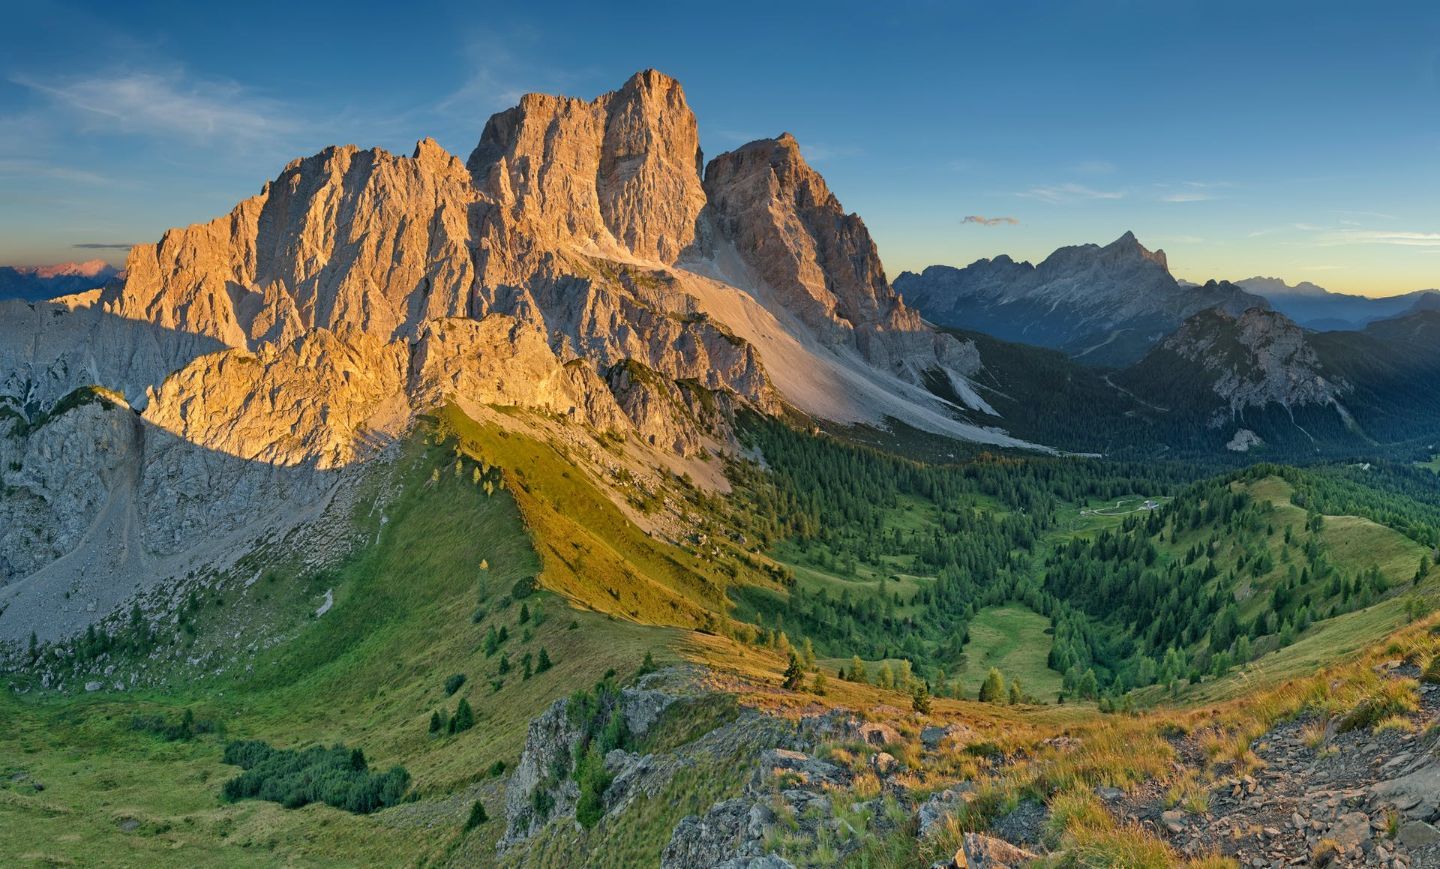 There are few places in Earth more remarkable than the Dolomiti Bellunesi National Park. Photo: Getty